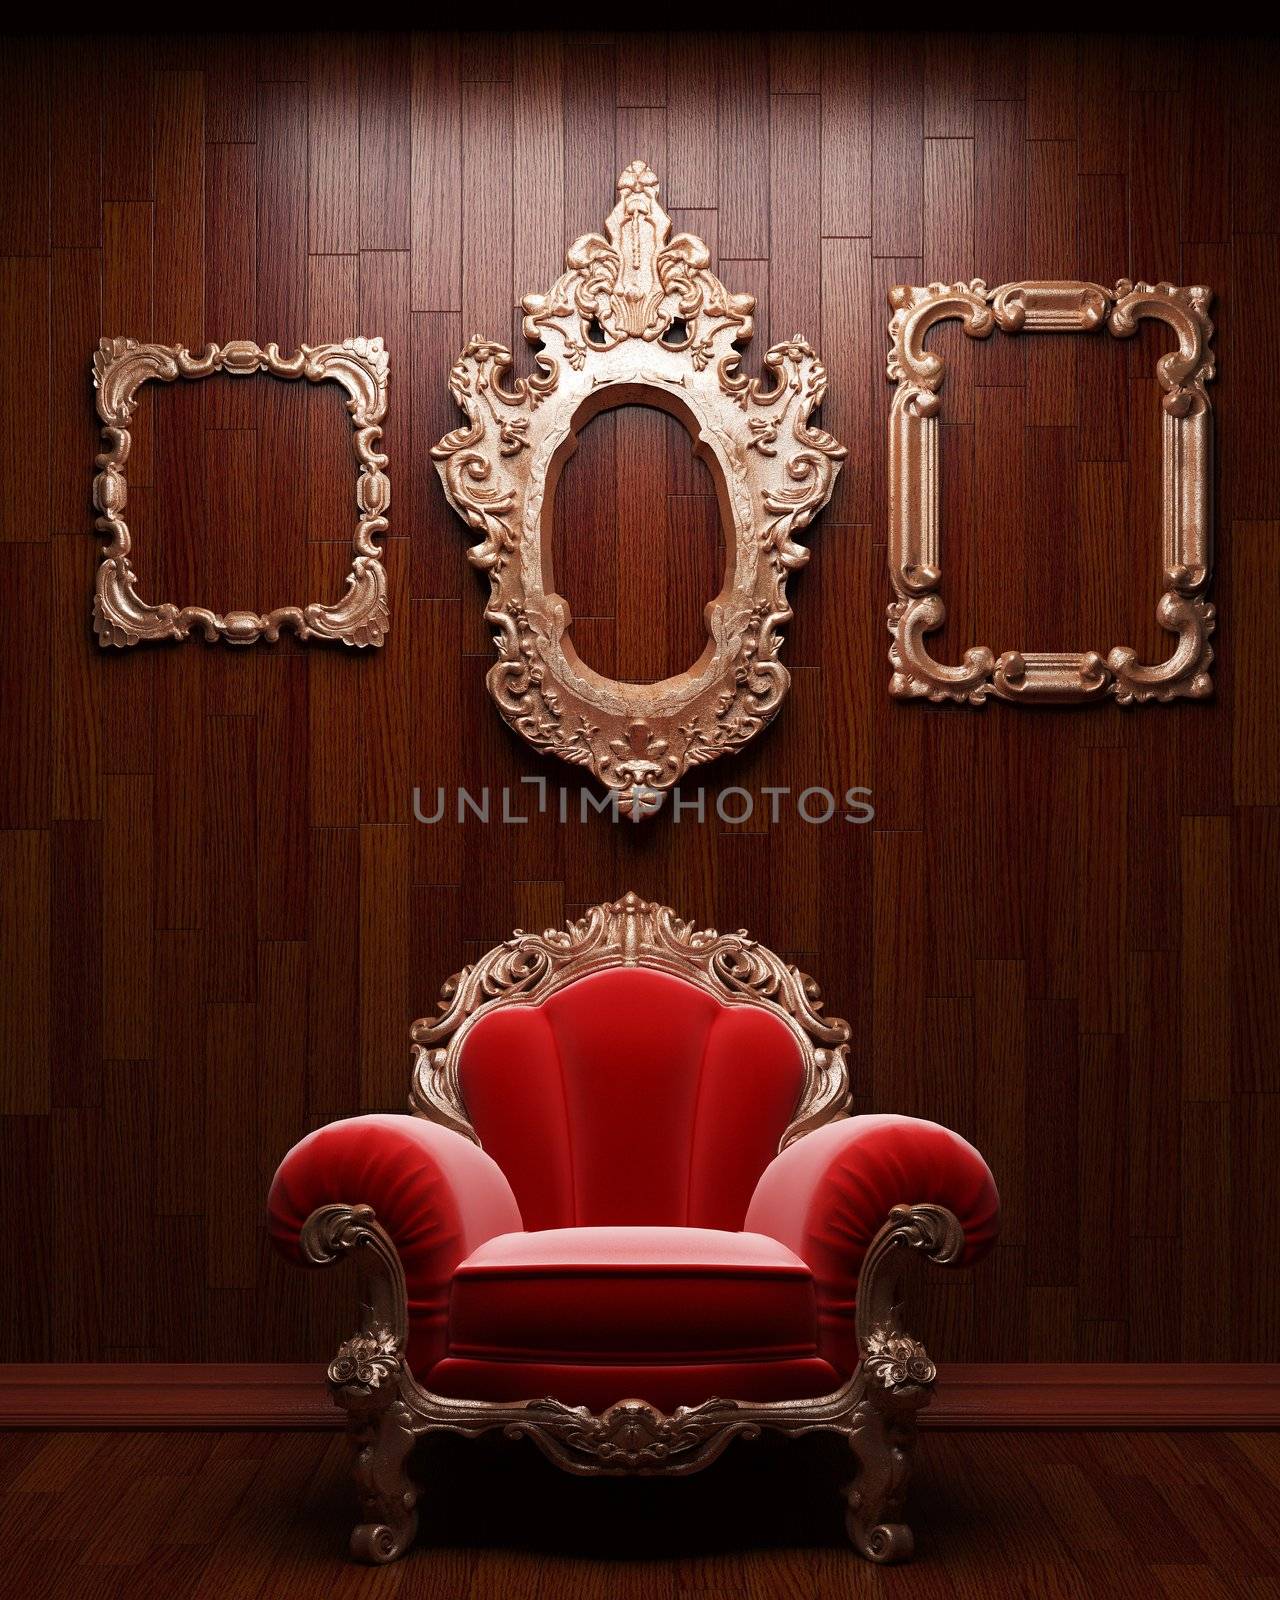 illuminated wooden wall and frame made in 3D